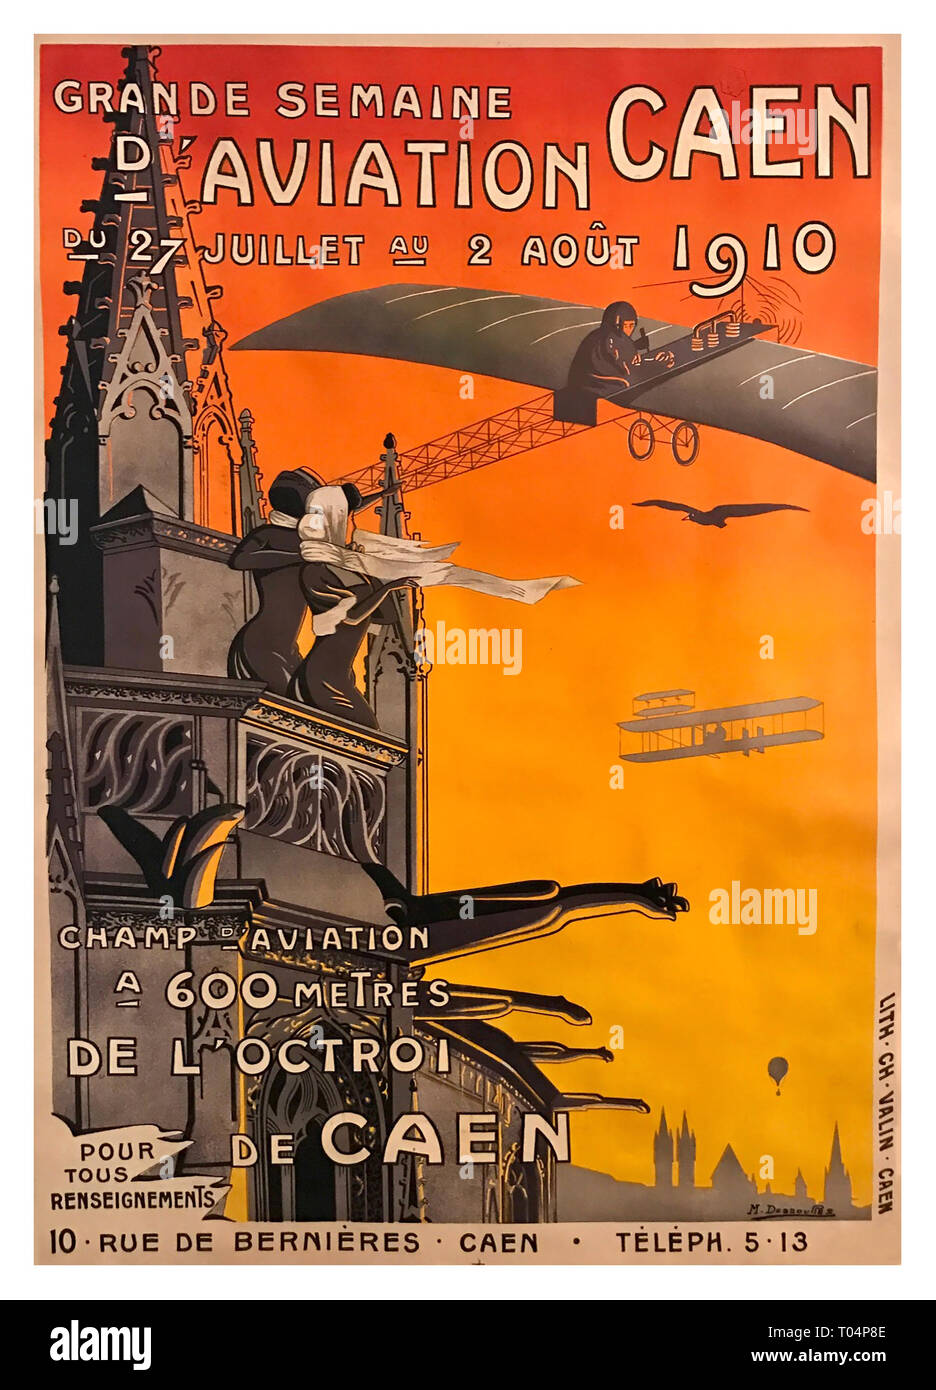 1910 SEMAINE D’AVIATION, CAEN by Dessoures Midsummer, 1910, and nothing is better than watching those Magnificent Men in their Flying Machines from the top of the Église St-Pierre, in Caen. Over 60,000 spectators a day took in the spectacle (though few from this vantage point), which included “competitive events between ‘civilians’ and ‘servicemen'” (Affiches d’Aviation, p. 57) in hot-air balloons and rudimentary flyers in the infancy of the aviators’ age. Stock Photo